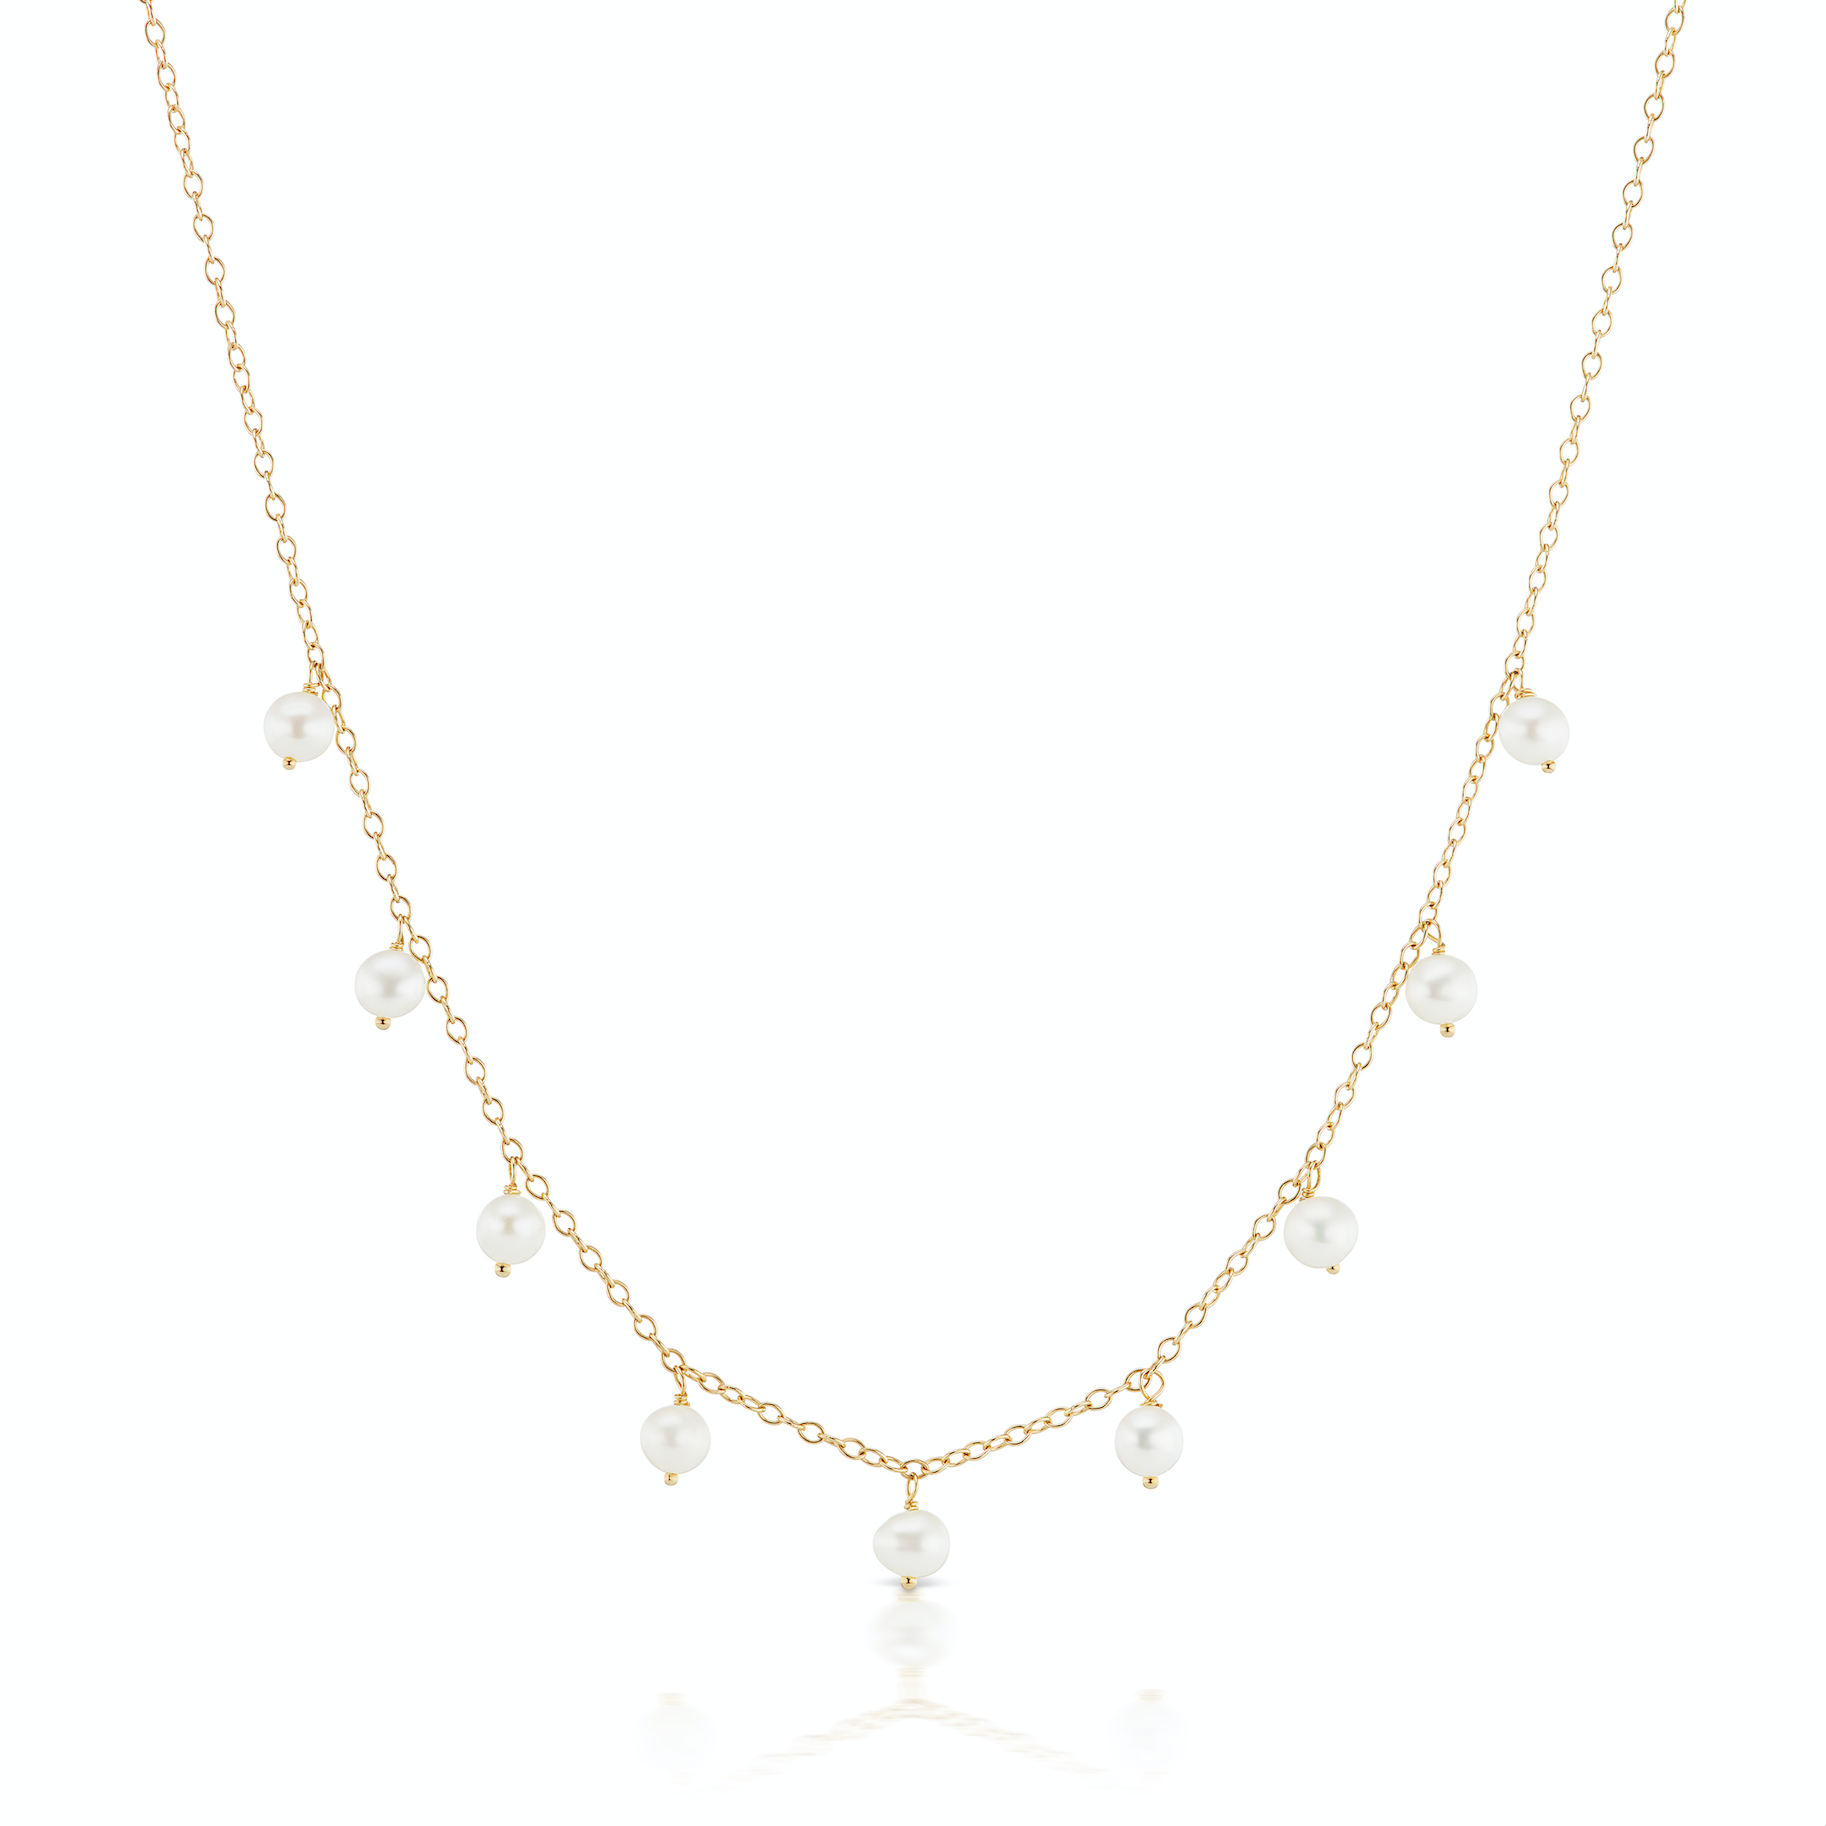 The Gold Multi Pearl Necklace